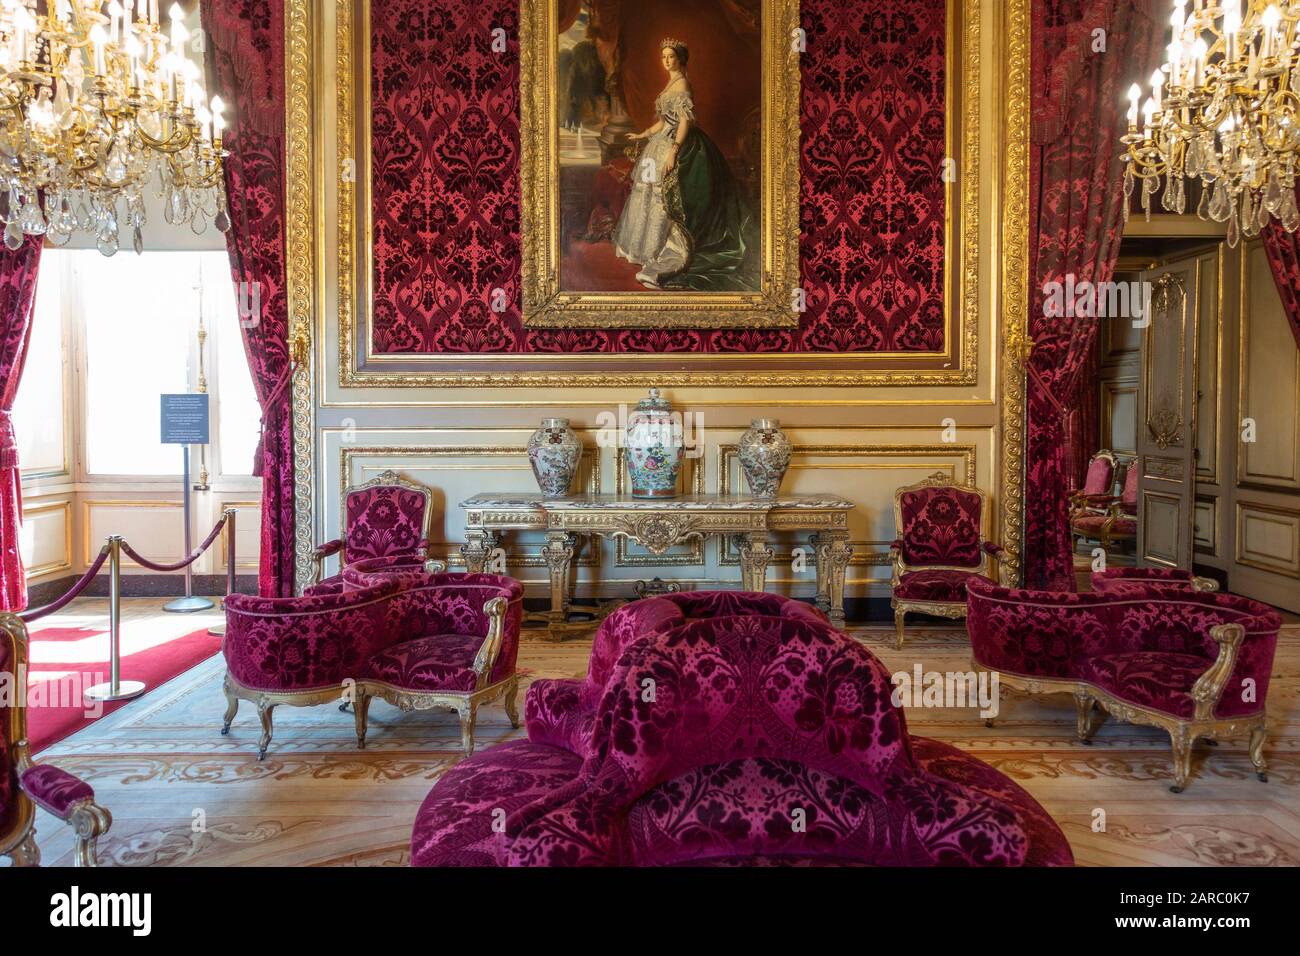 Grand Salon In The Napoleon Iii Apartments Appartements Napoleon Iii In Richelieu Wing Of Louvre Museum Musee Du Louvre In Paris France Stock Photo Alamy